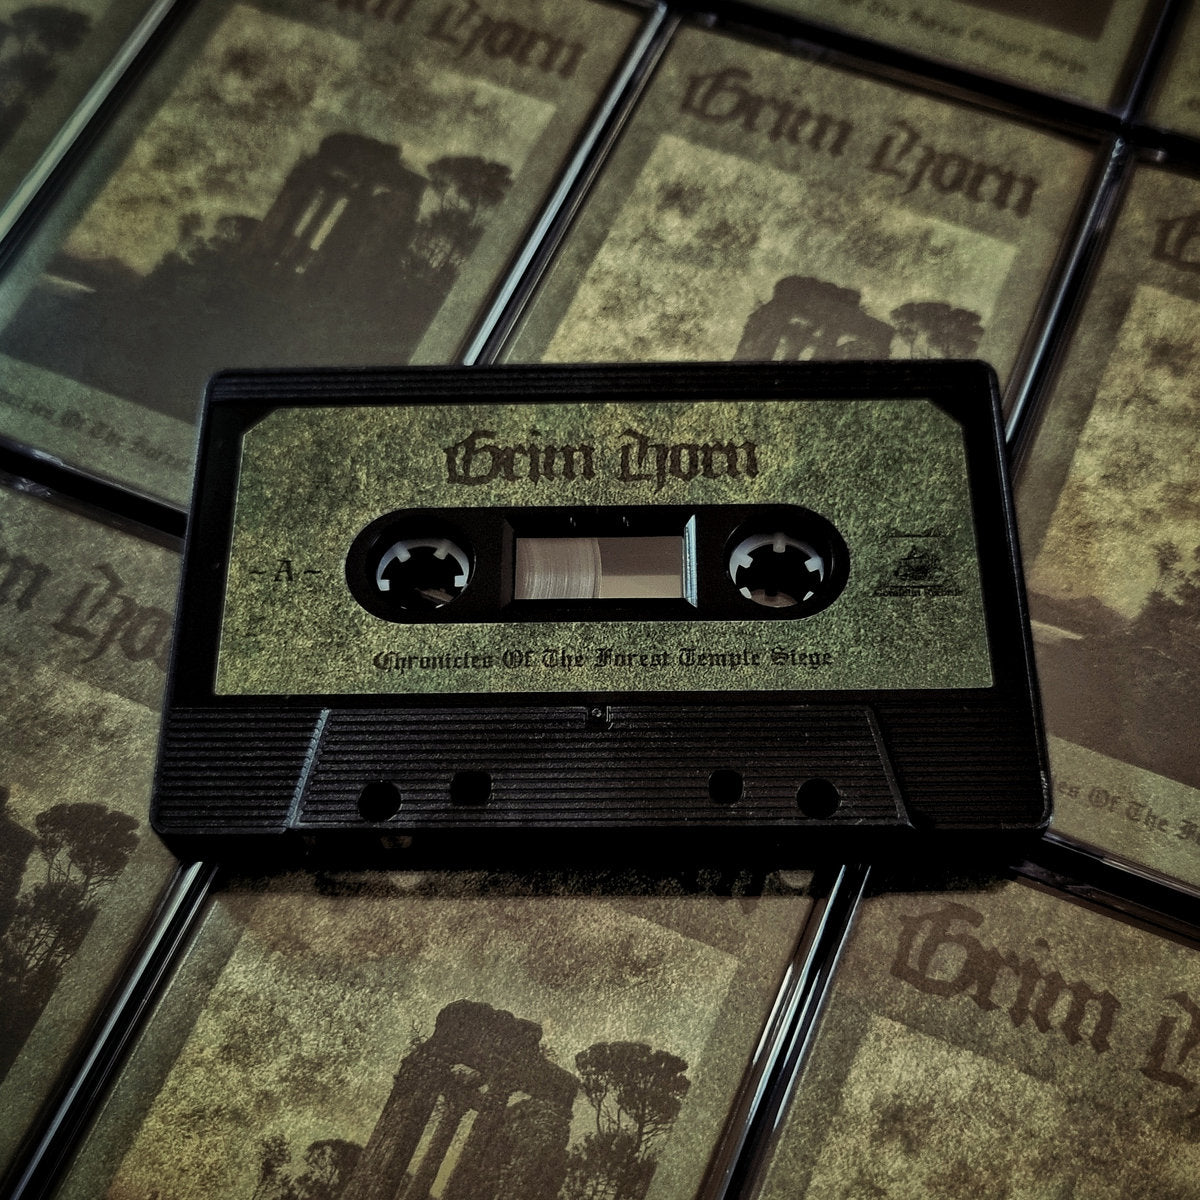 [SOLD OUT] GRIM HORN "Chronicles Of The Forest Temple Siege" Cassette Tape (lim.130) *SHIPS END OF MARCH*